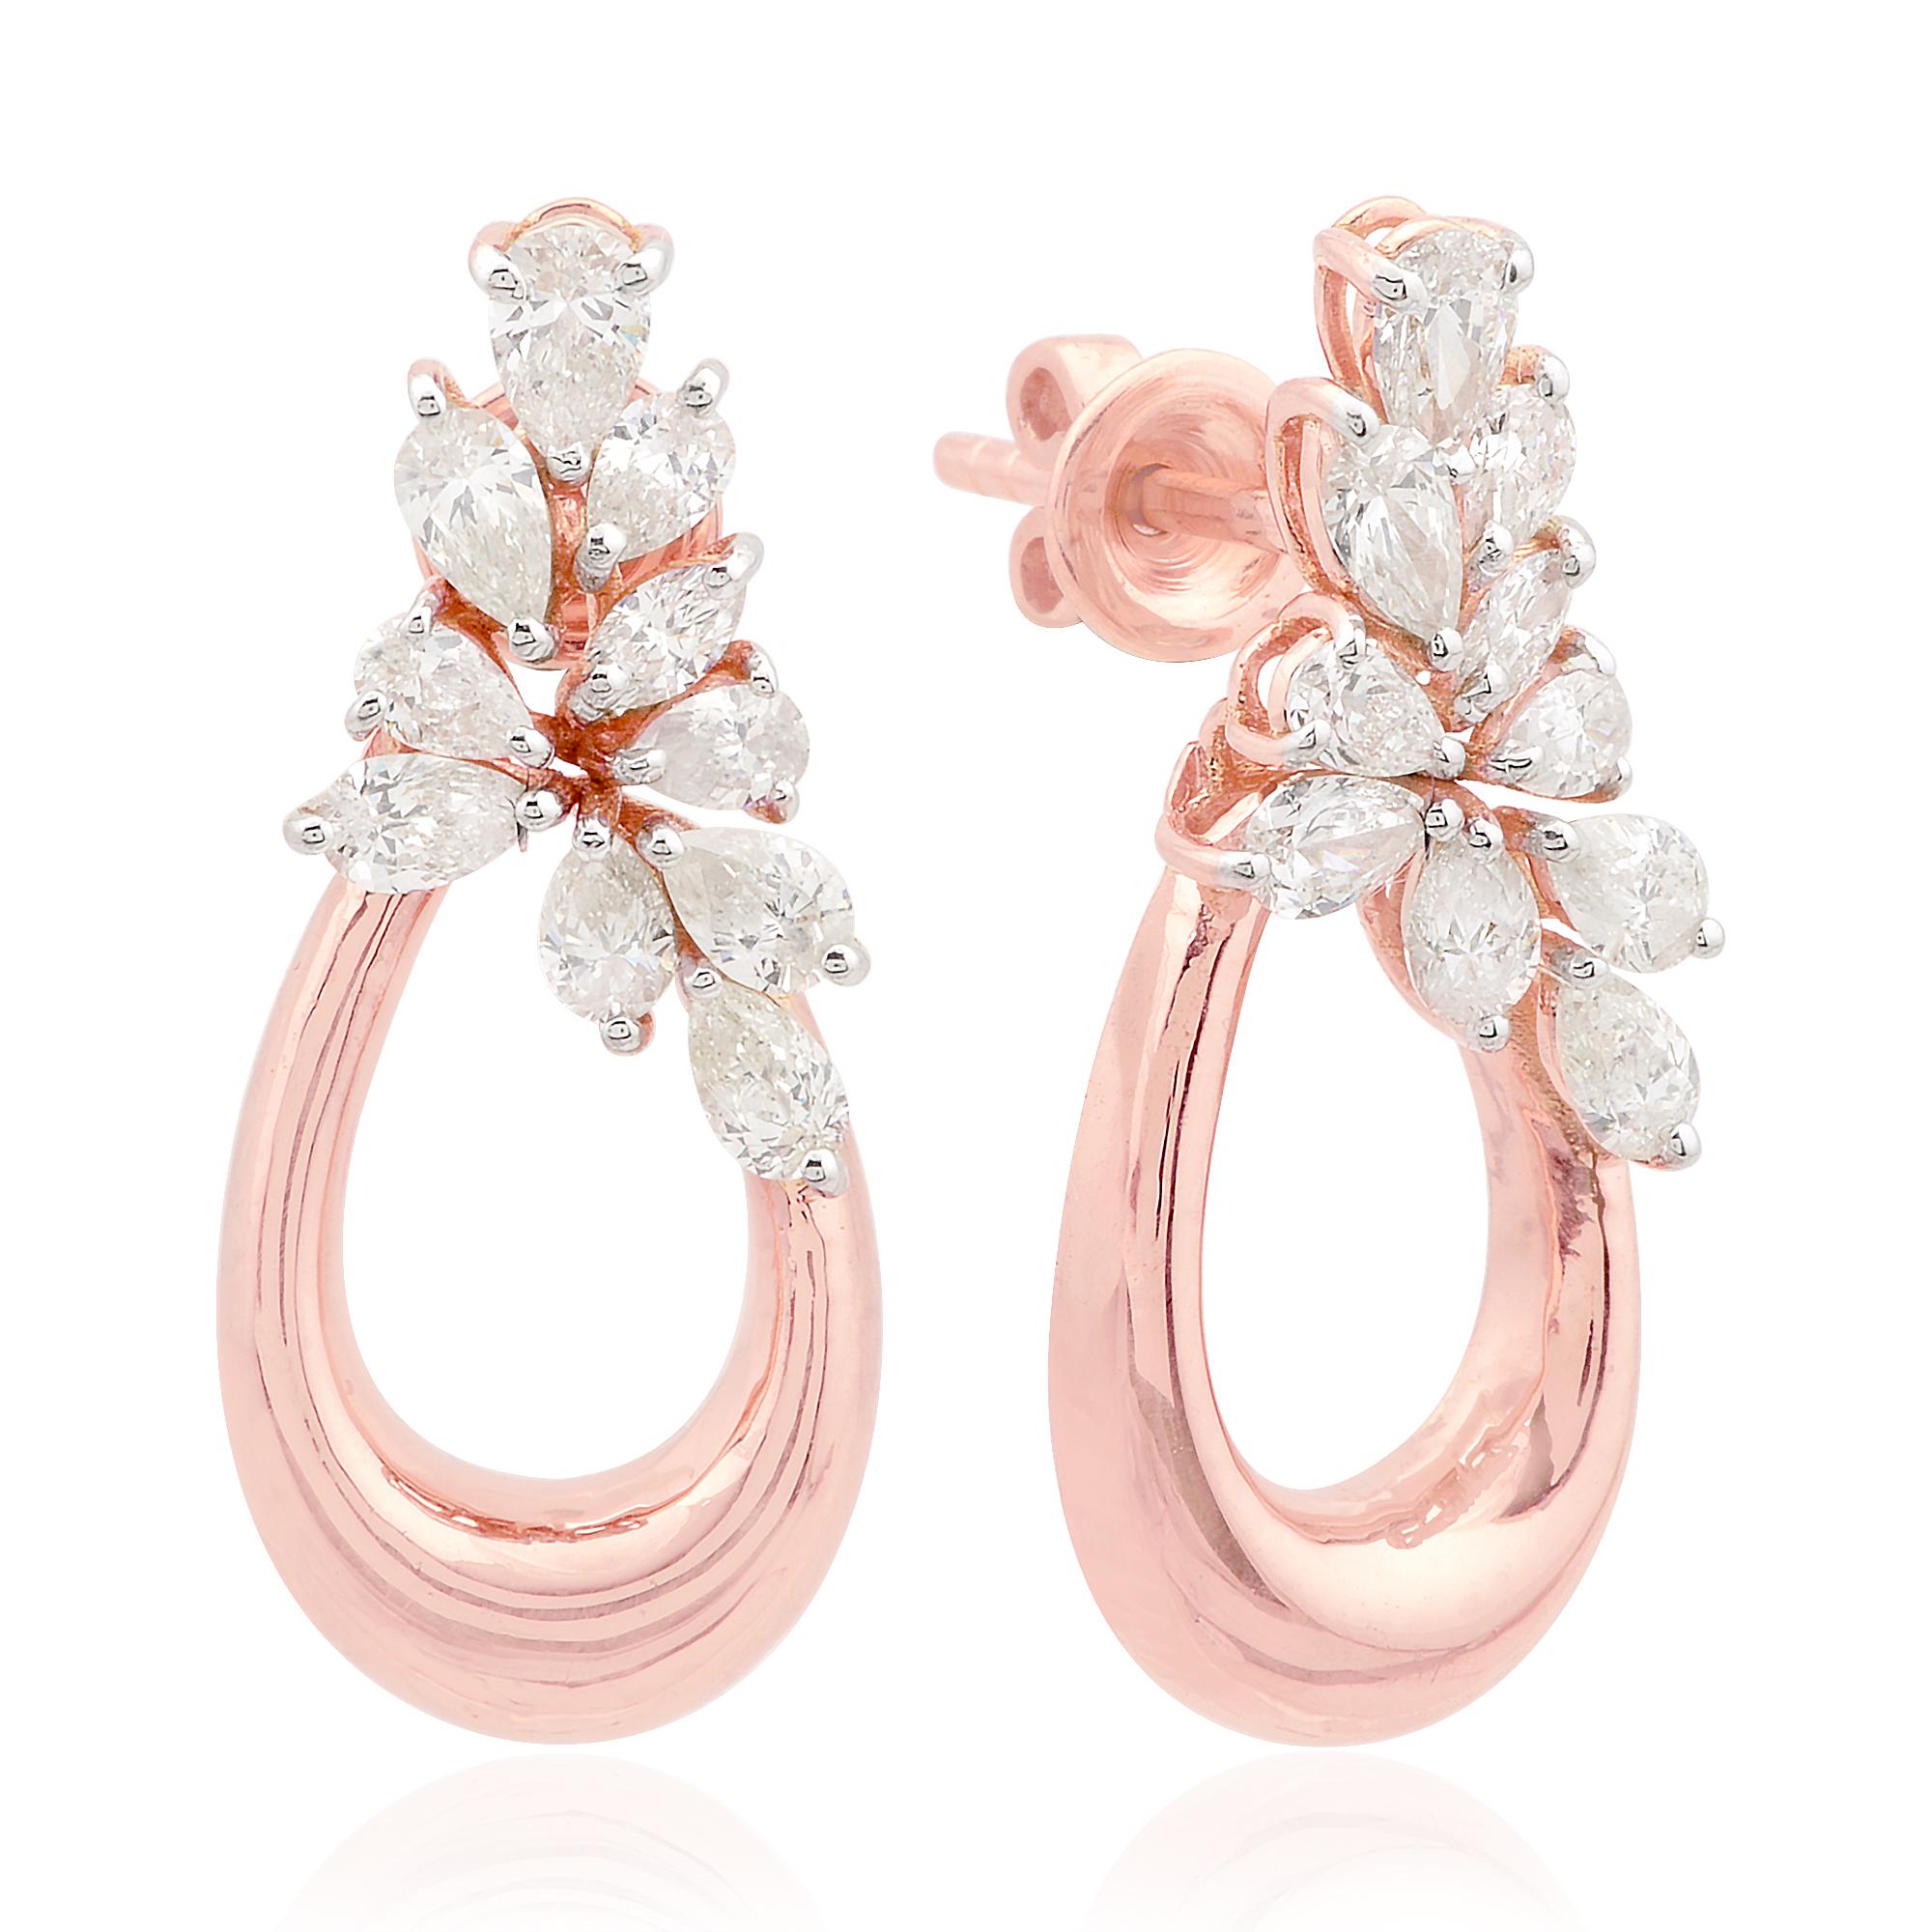 Adorn yourself with the breathtaking beauty of these 1.3 Carat SI/HI Pear Marquise Diamond Dangle Earrings, expertly crafted in alluring 18 Karat Rose Gold. These exquisite earrings are a fusion of timeless elegance and contemporary glamour,